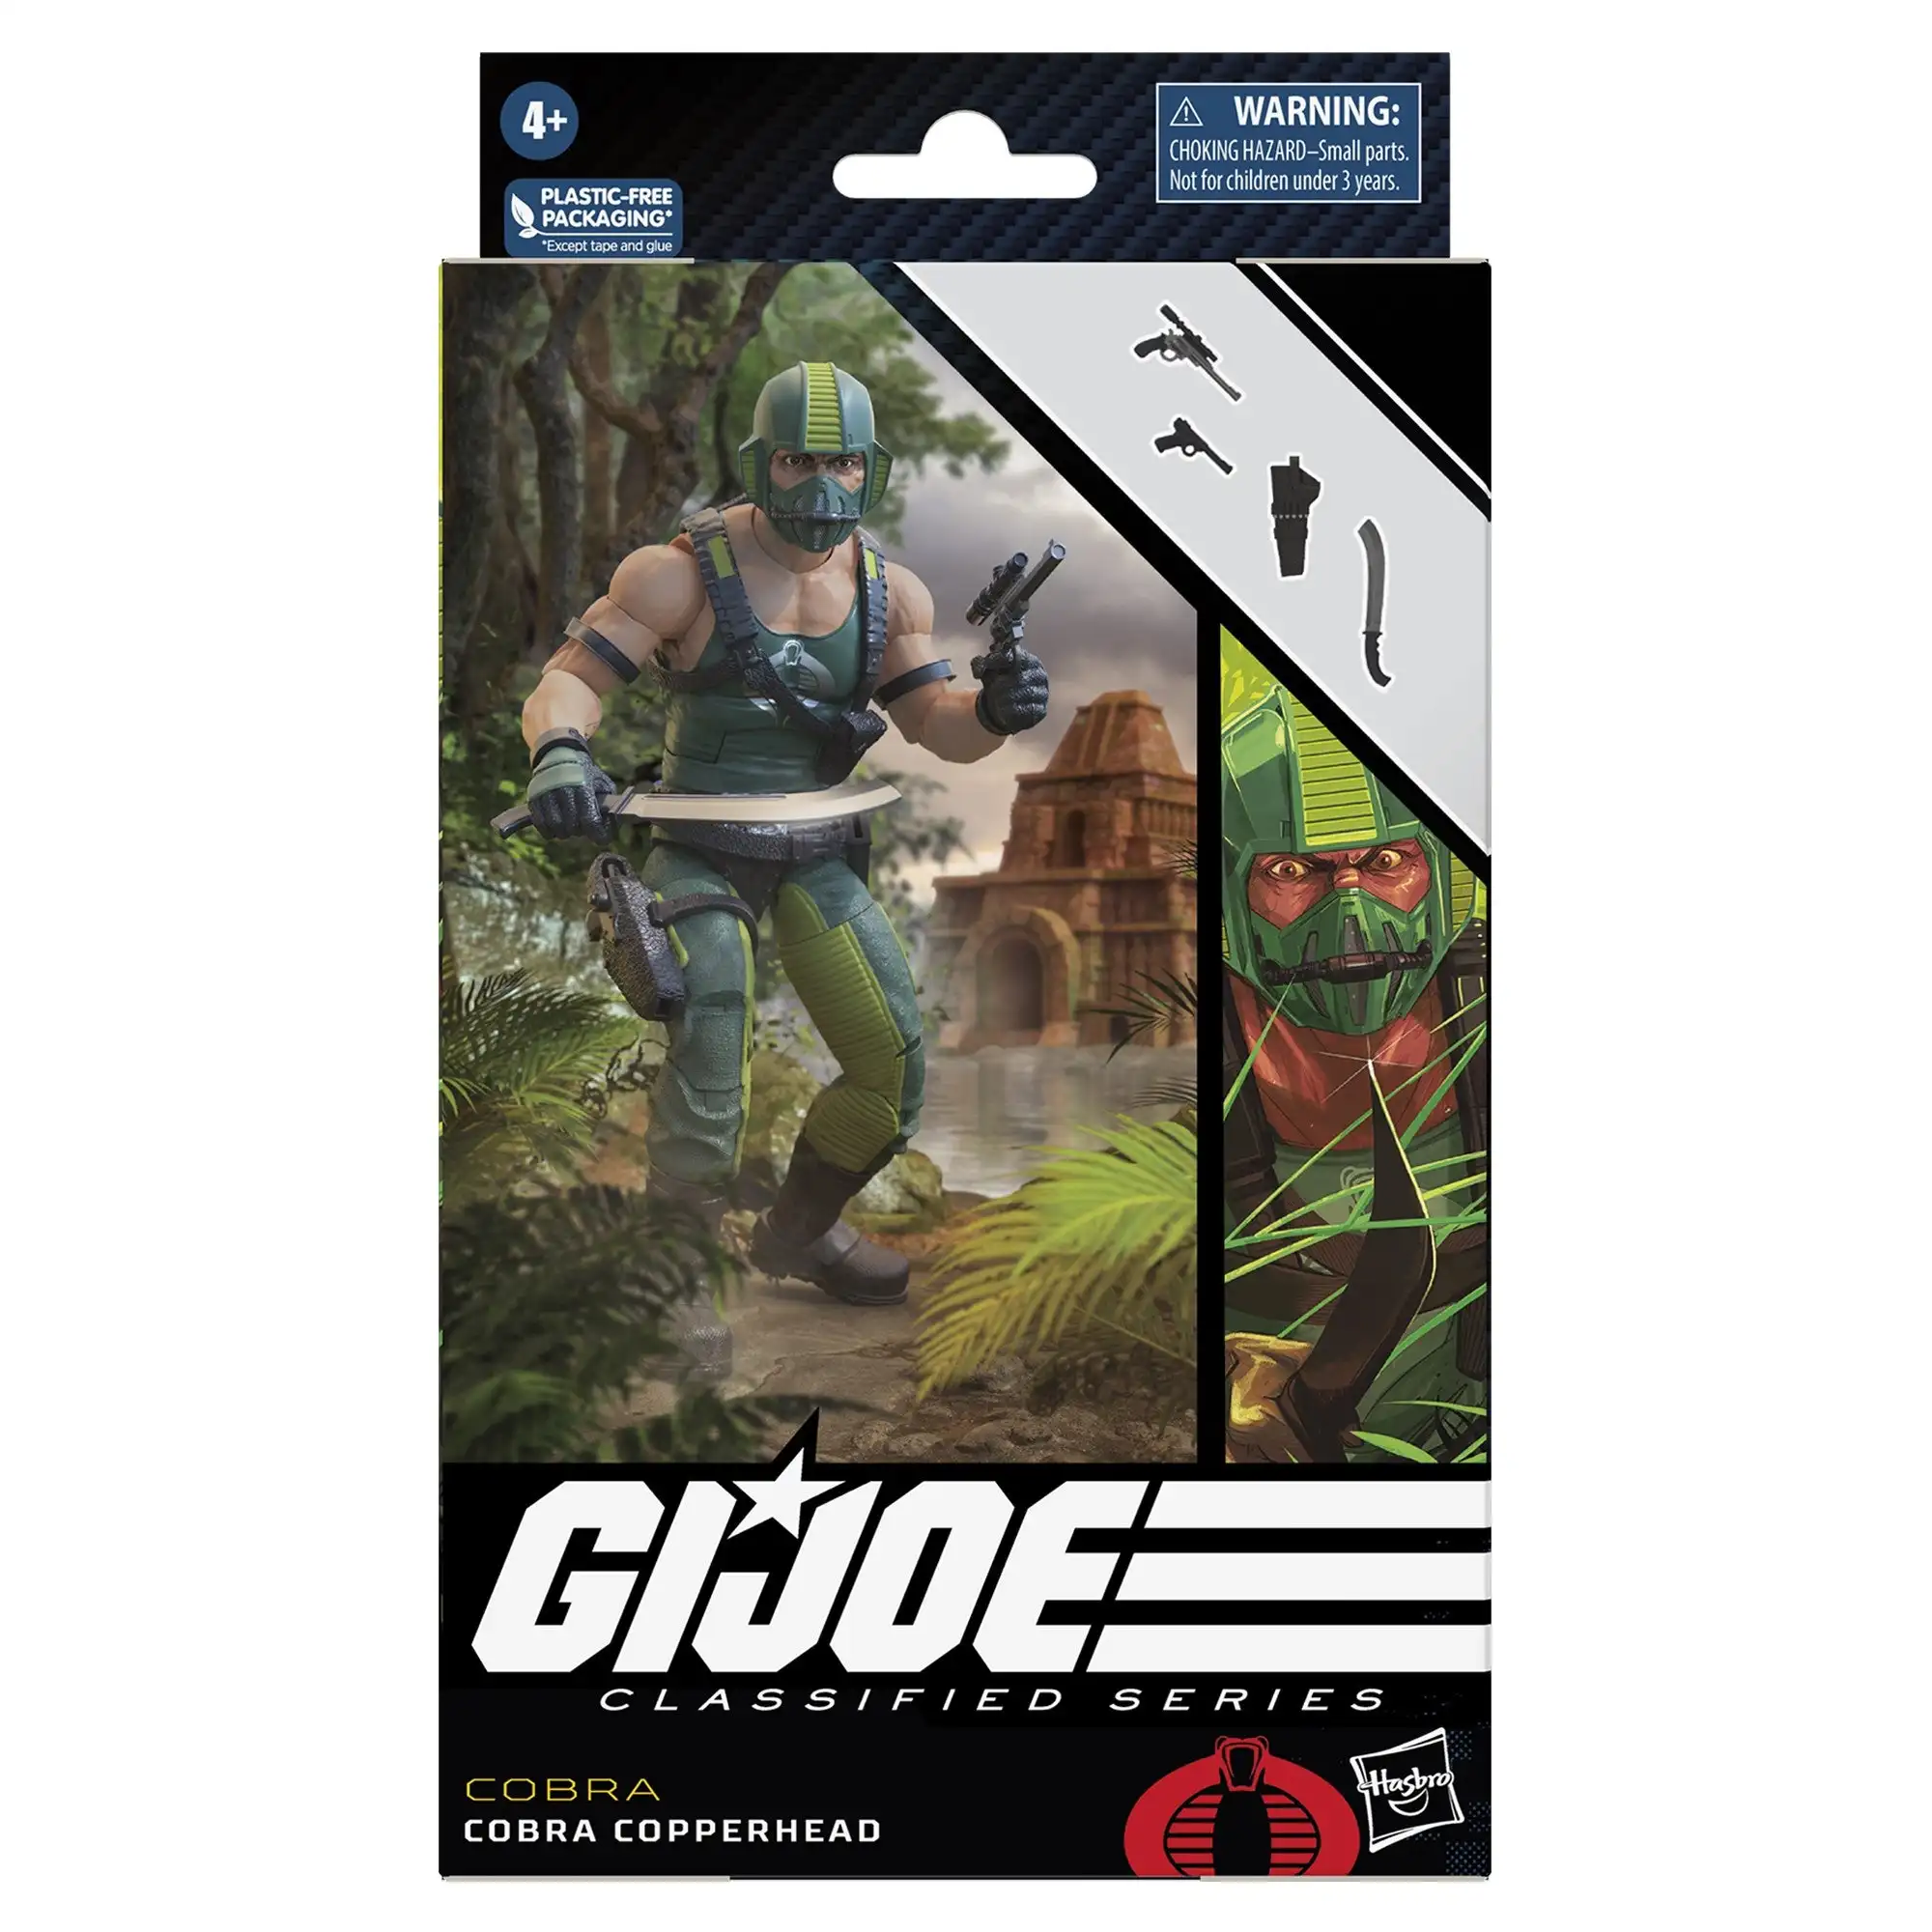 

Hasbro G.i. Joe Classified Series Cobra Copperhead Collectible Action Figures, 72, 6 Inch Action Figures with 4 Accessories